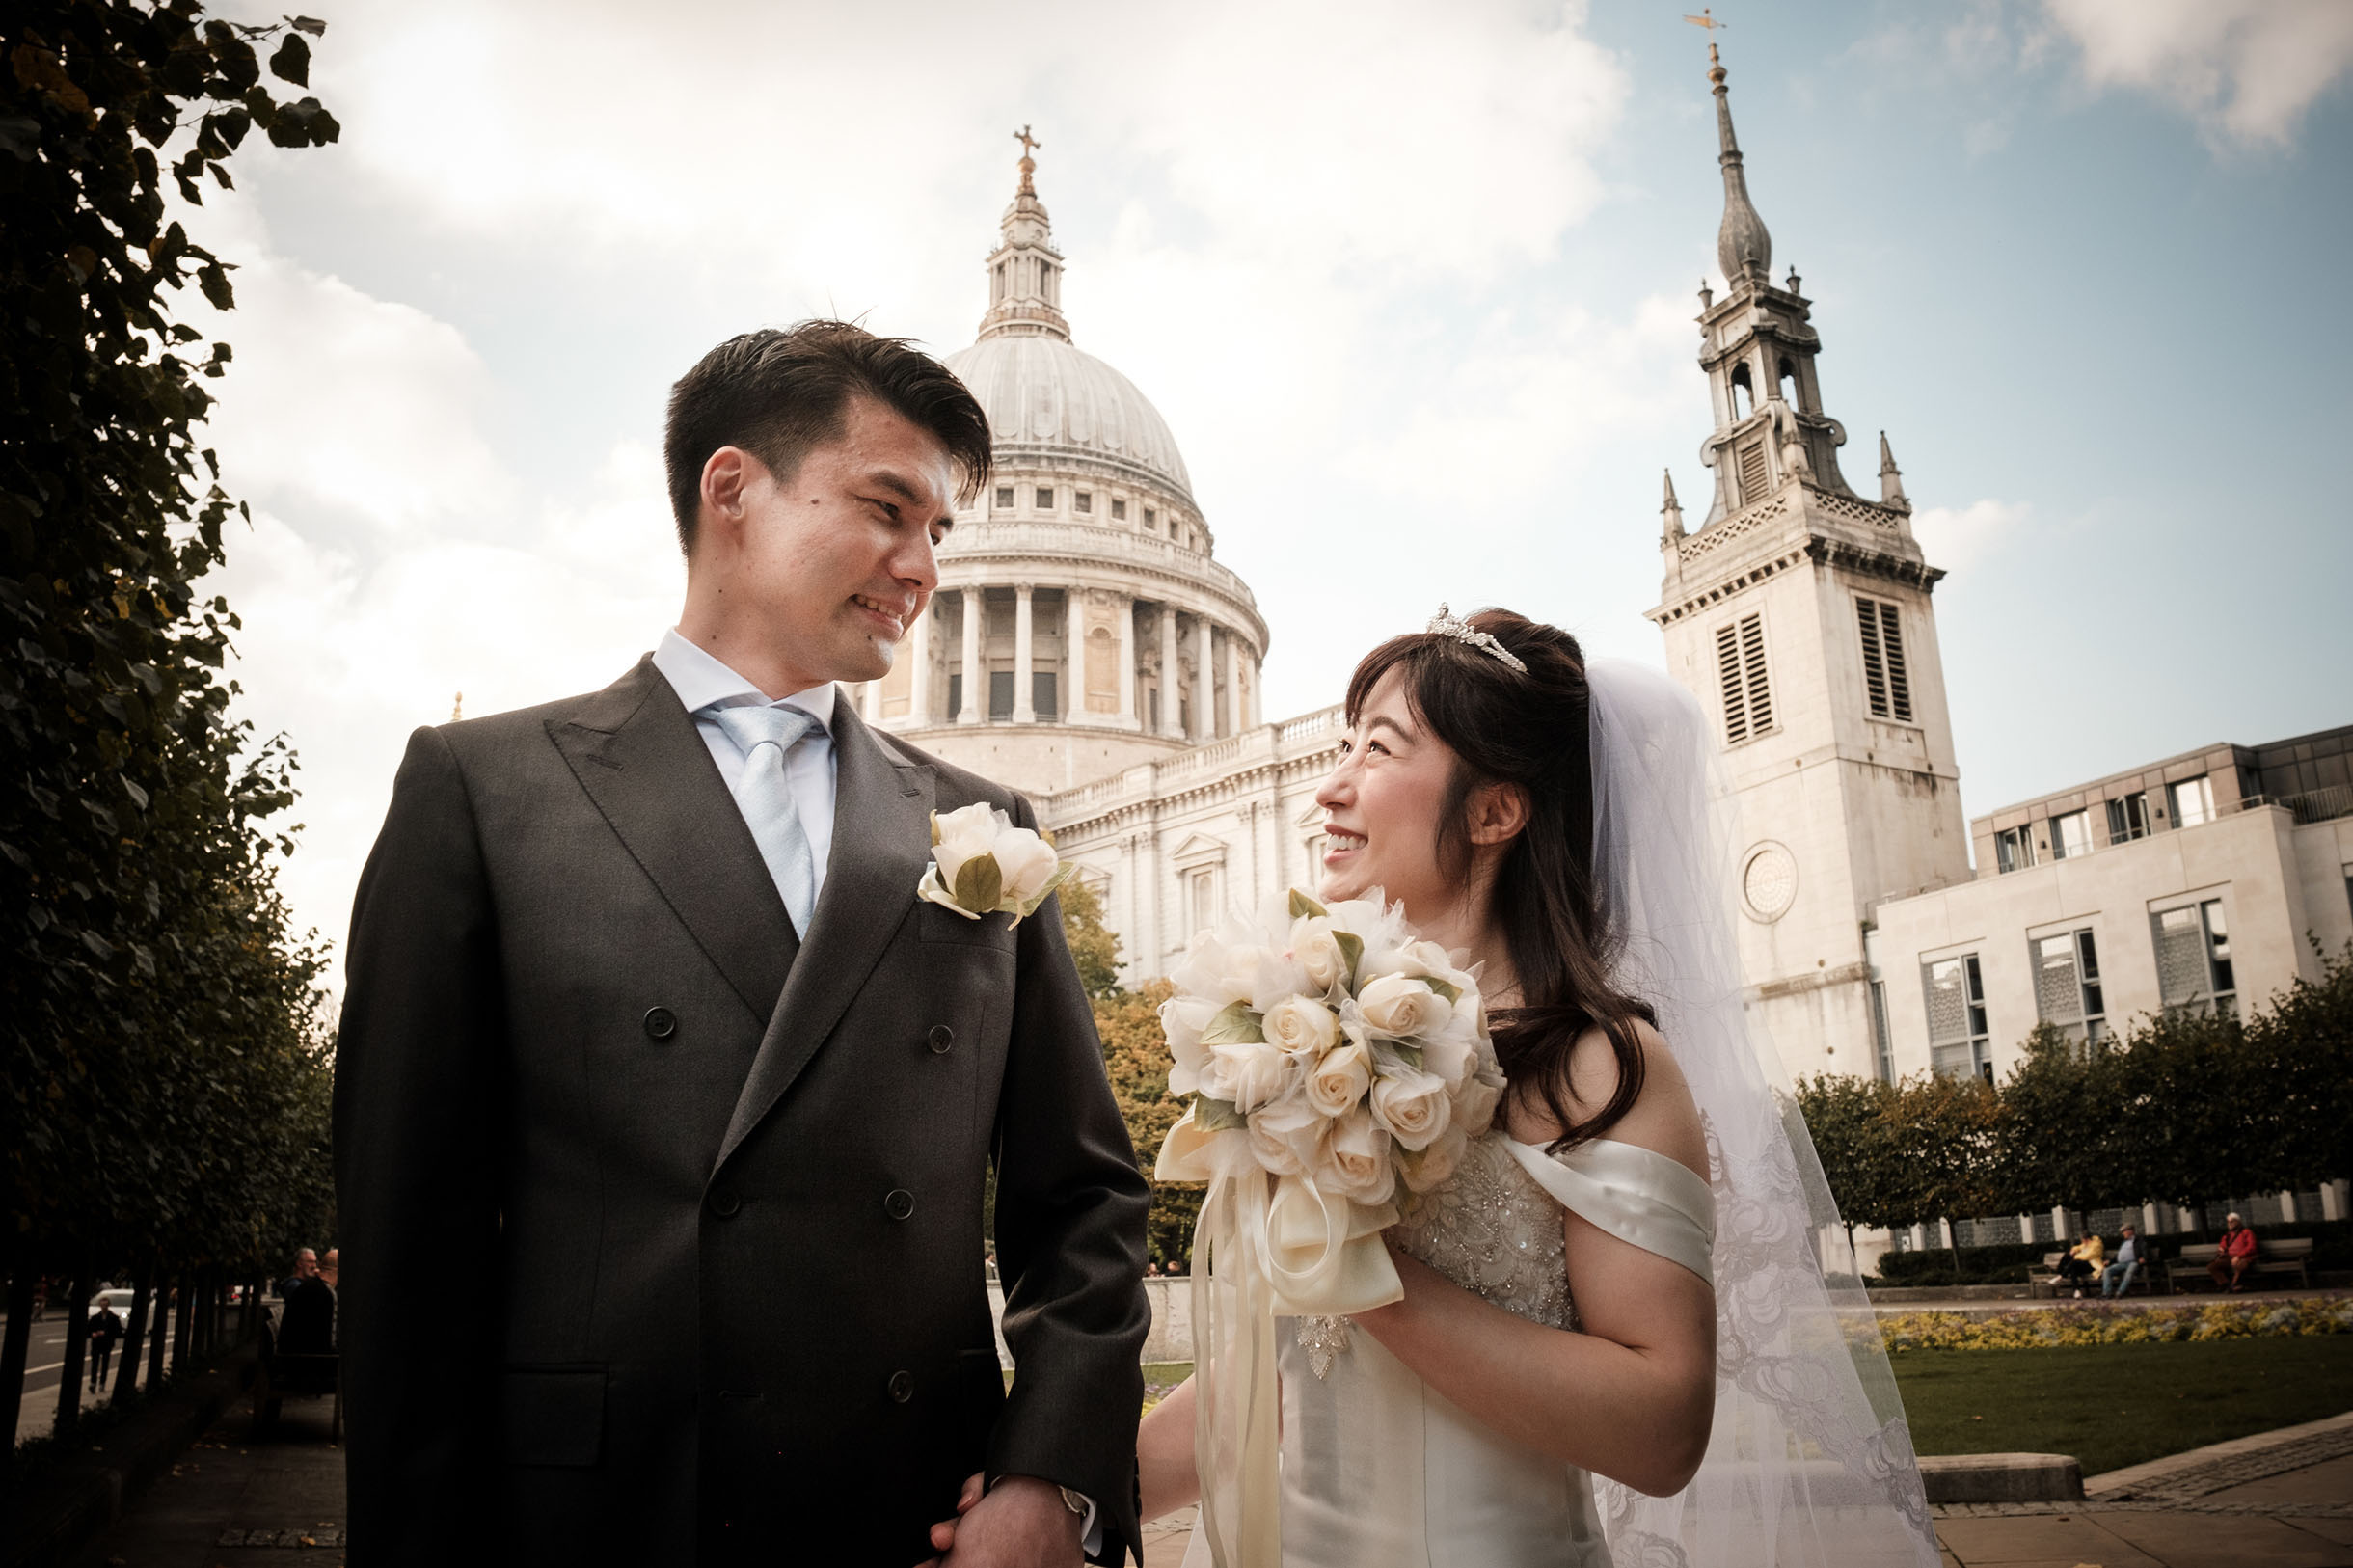 Wedding photography of a couple, looking at each other, London outdoors around St Paul's cathedral.